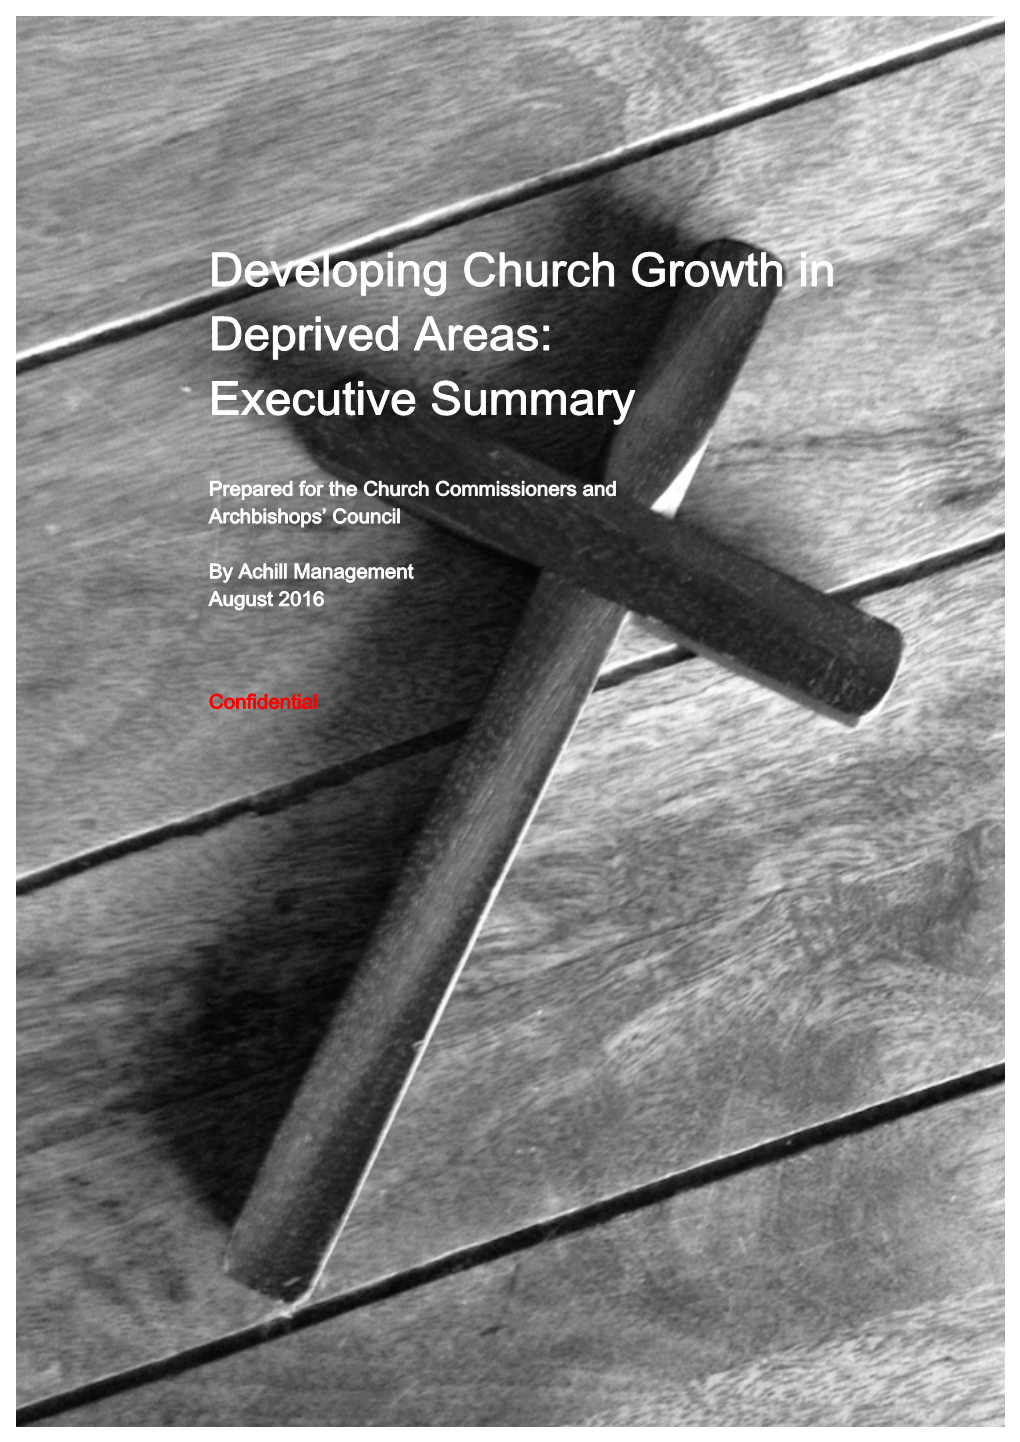 Developing Church Growth in Deprived Areas: Executive Summary